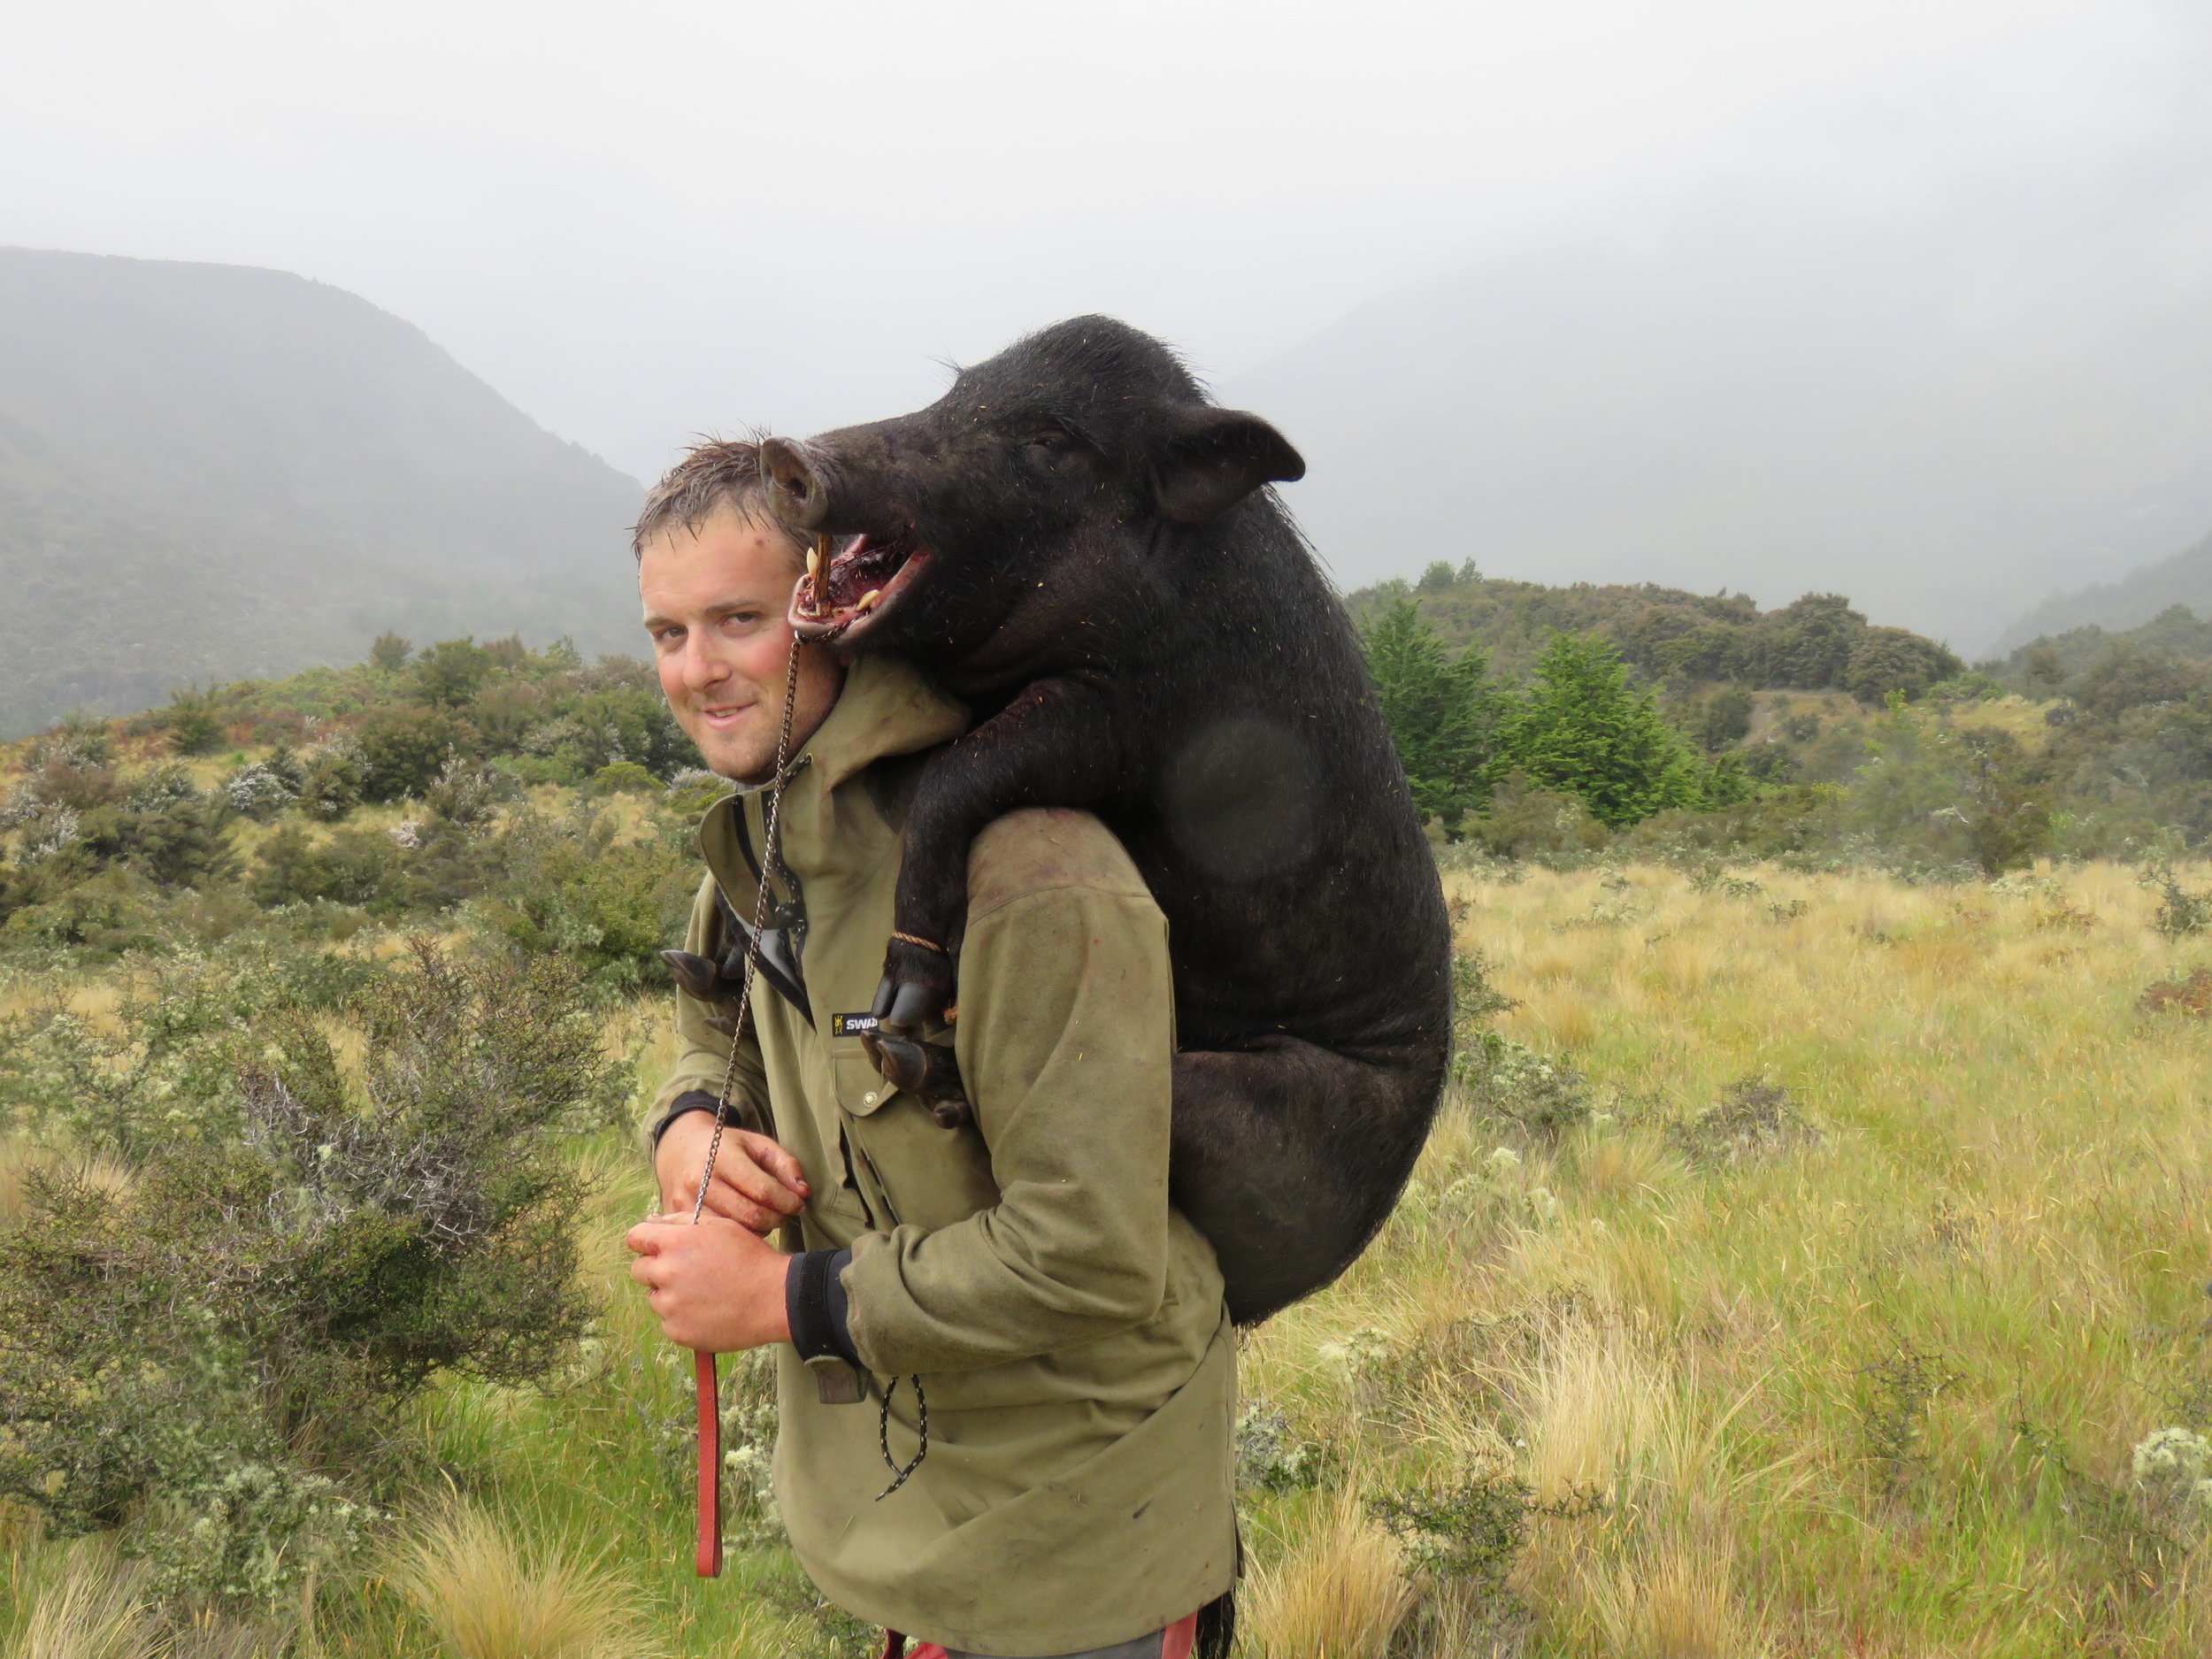  The Swazi Tahr anorak was a definite game changer in hunting apparel.  